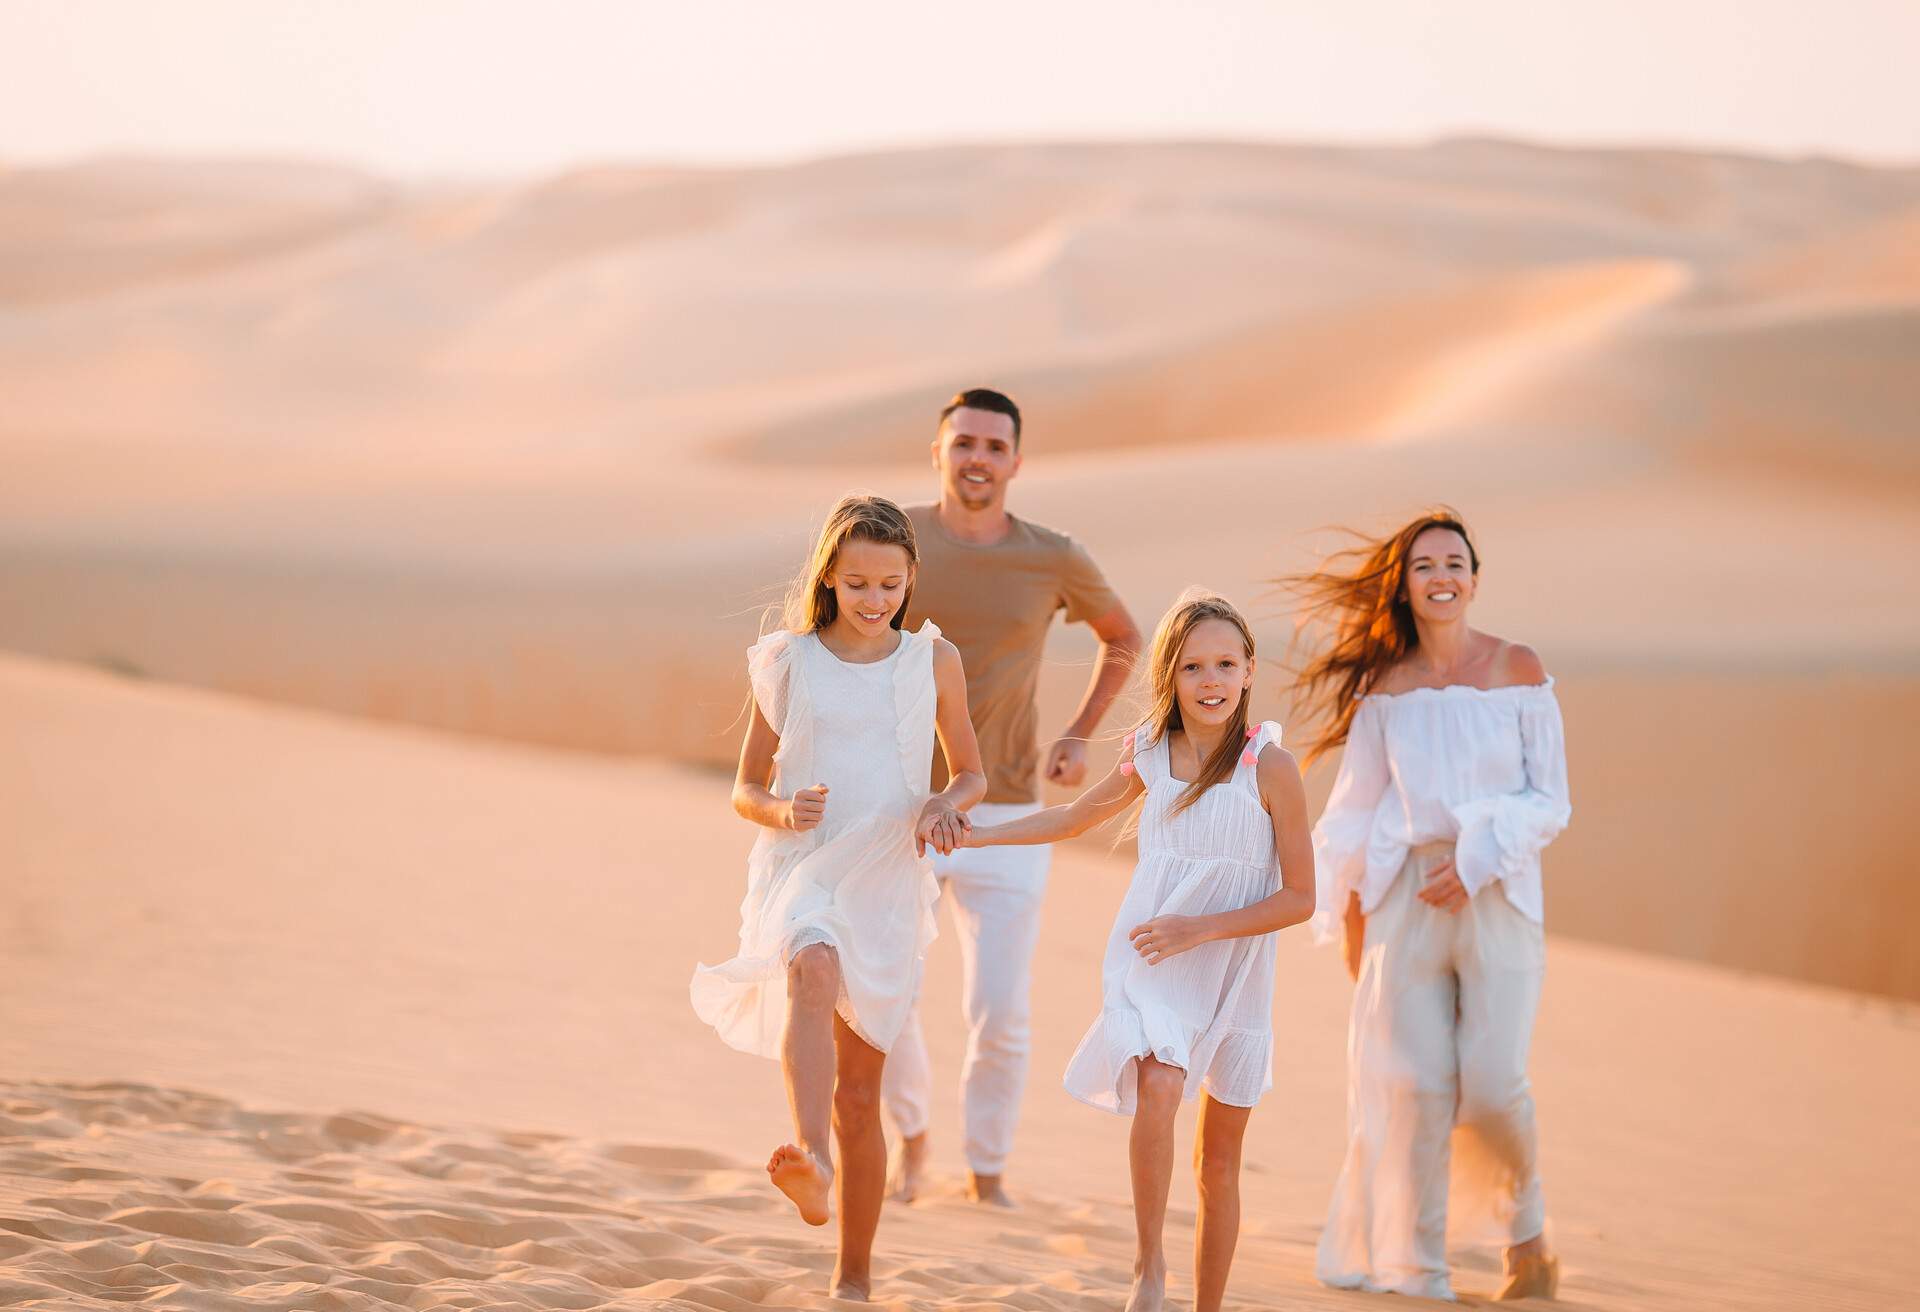 Parents and kids on vacation in dunes in big sand desert